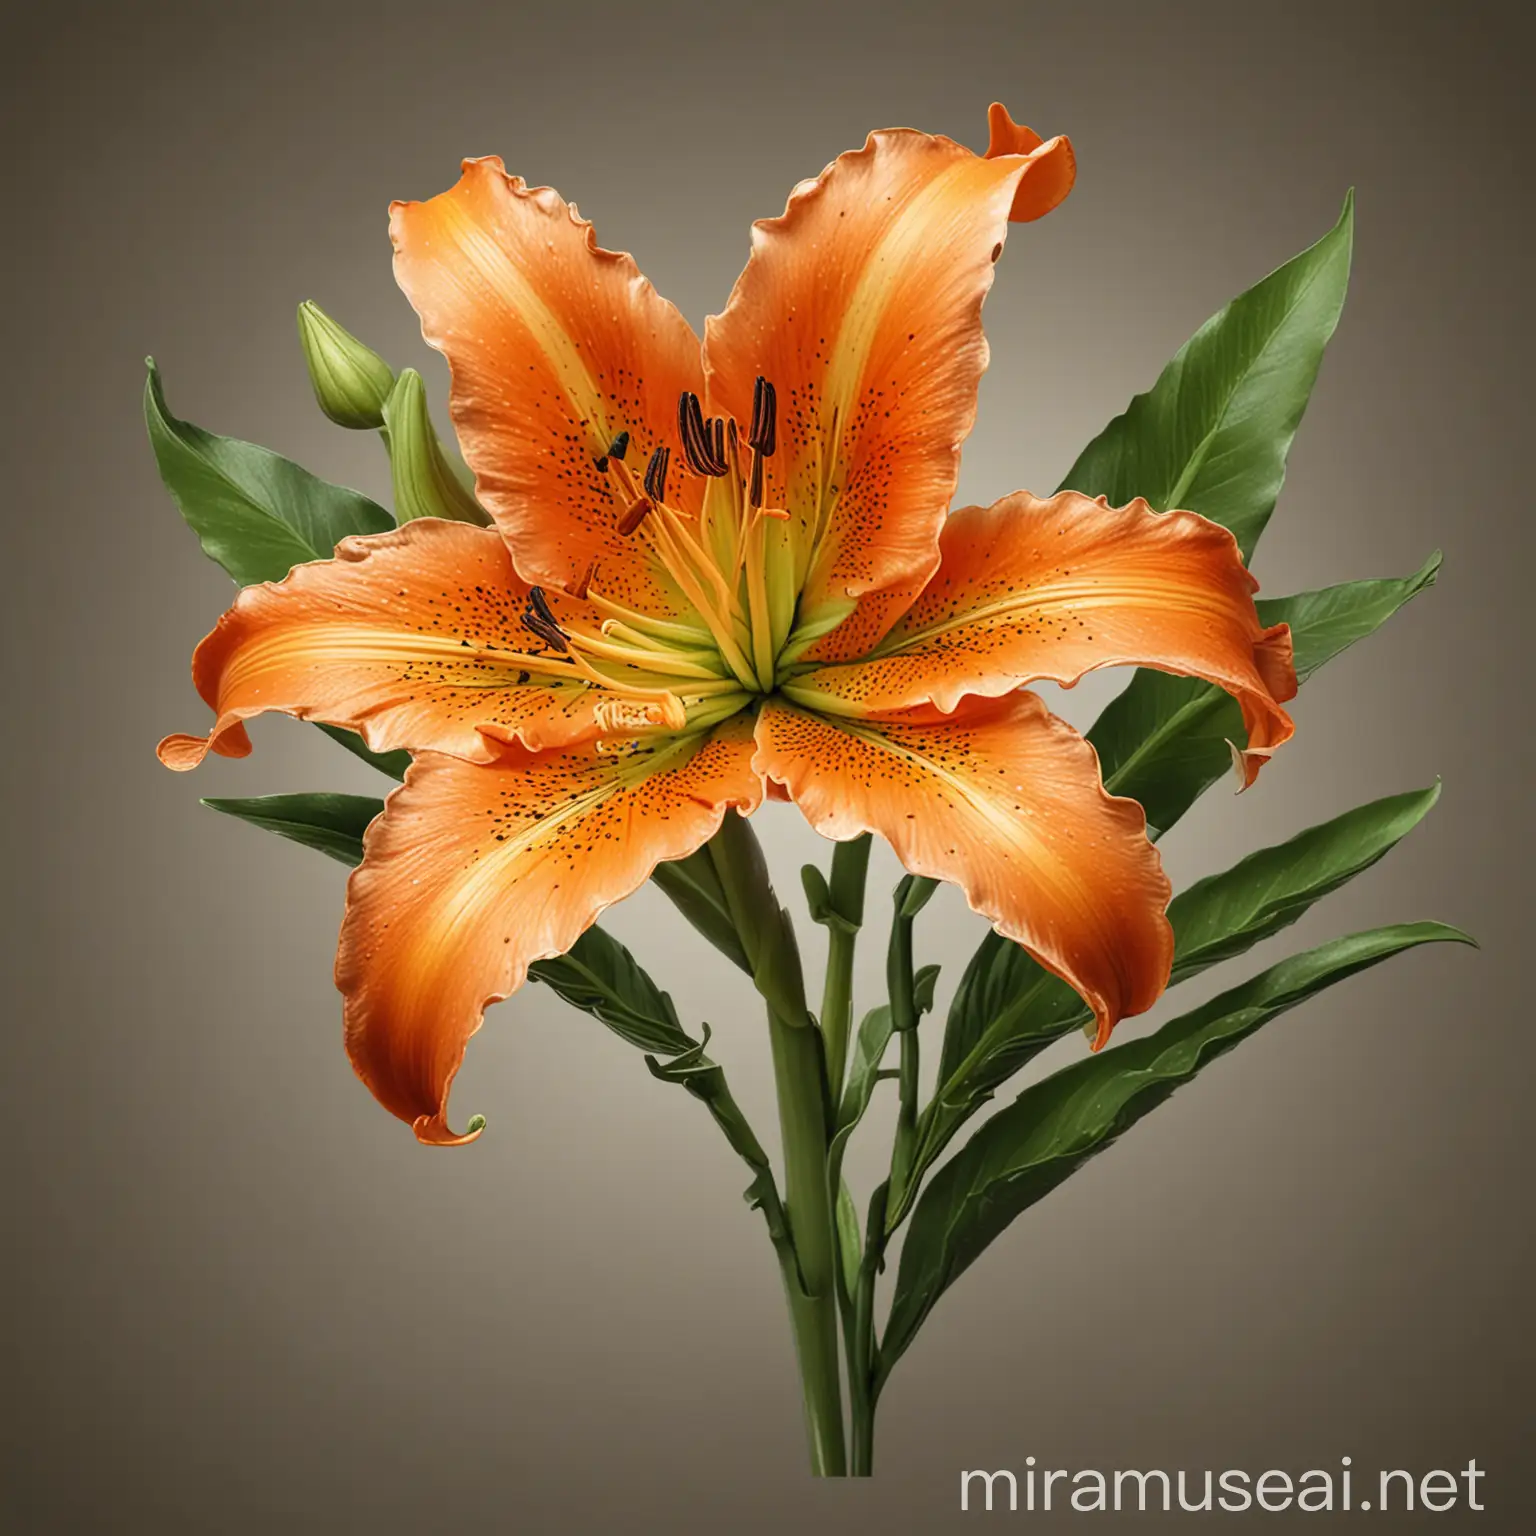 Detailed Clipart Illustration, Vibrant Orange Lily Flower, Natural Elegance, Detailed Petals and Stamen, Botanical Accuracy, Clipart Style, High Resolution, Detailed, Realistic Presentation, (Rich Colors:1.4), (Intricate Details:1.5), Botanical Accuracy, Focus on Petal Texture and Structure, Green Stem and Leaves, Capturing Natural Beauty, Suitable for Clipart Usage